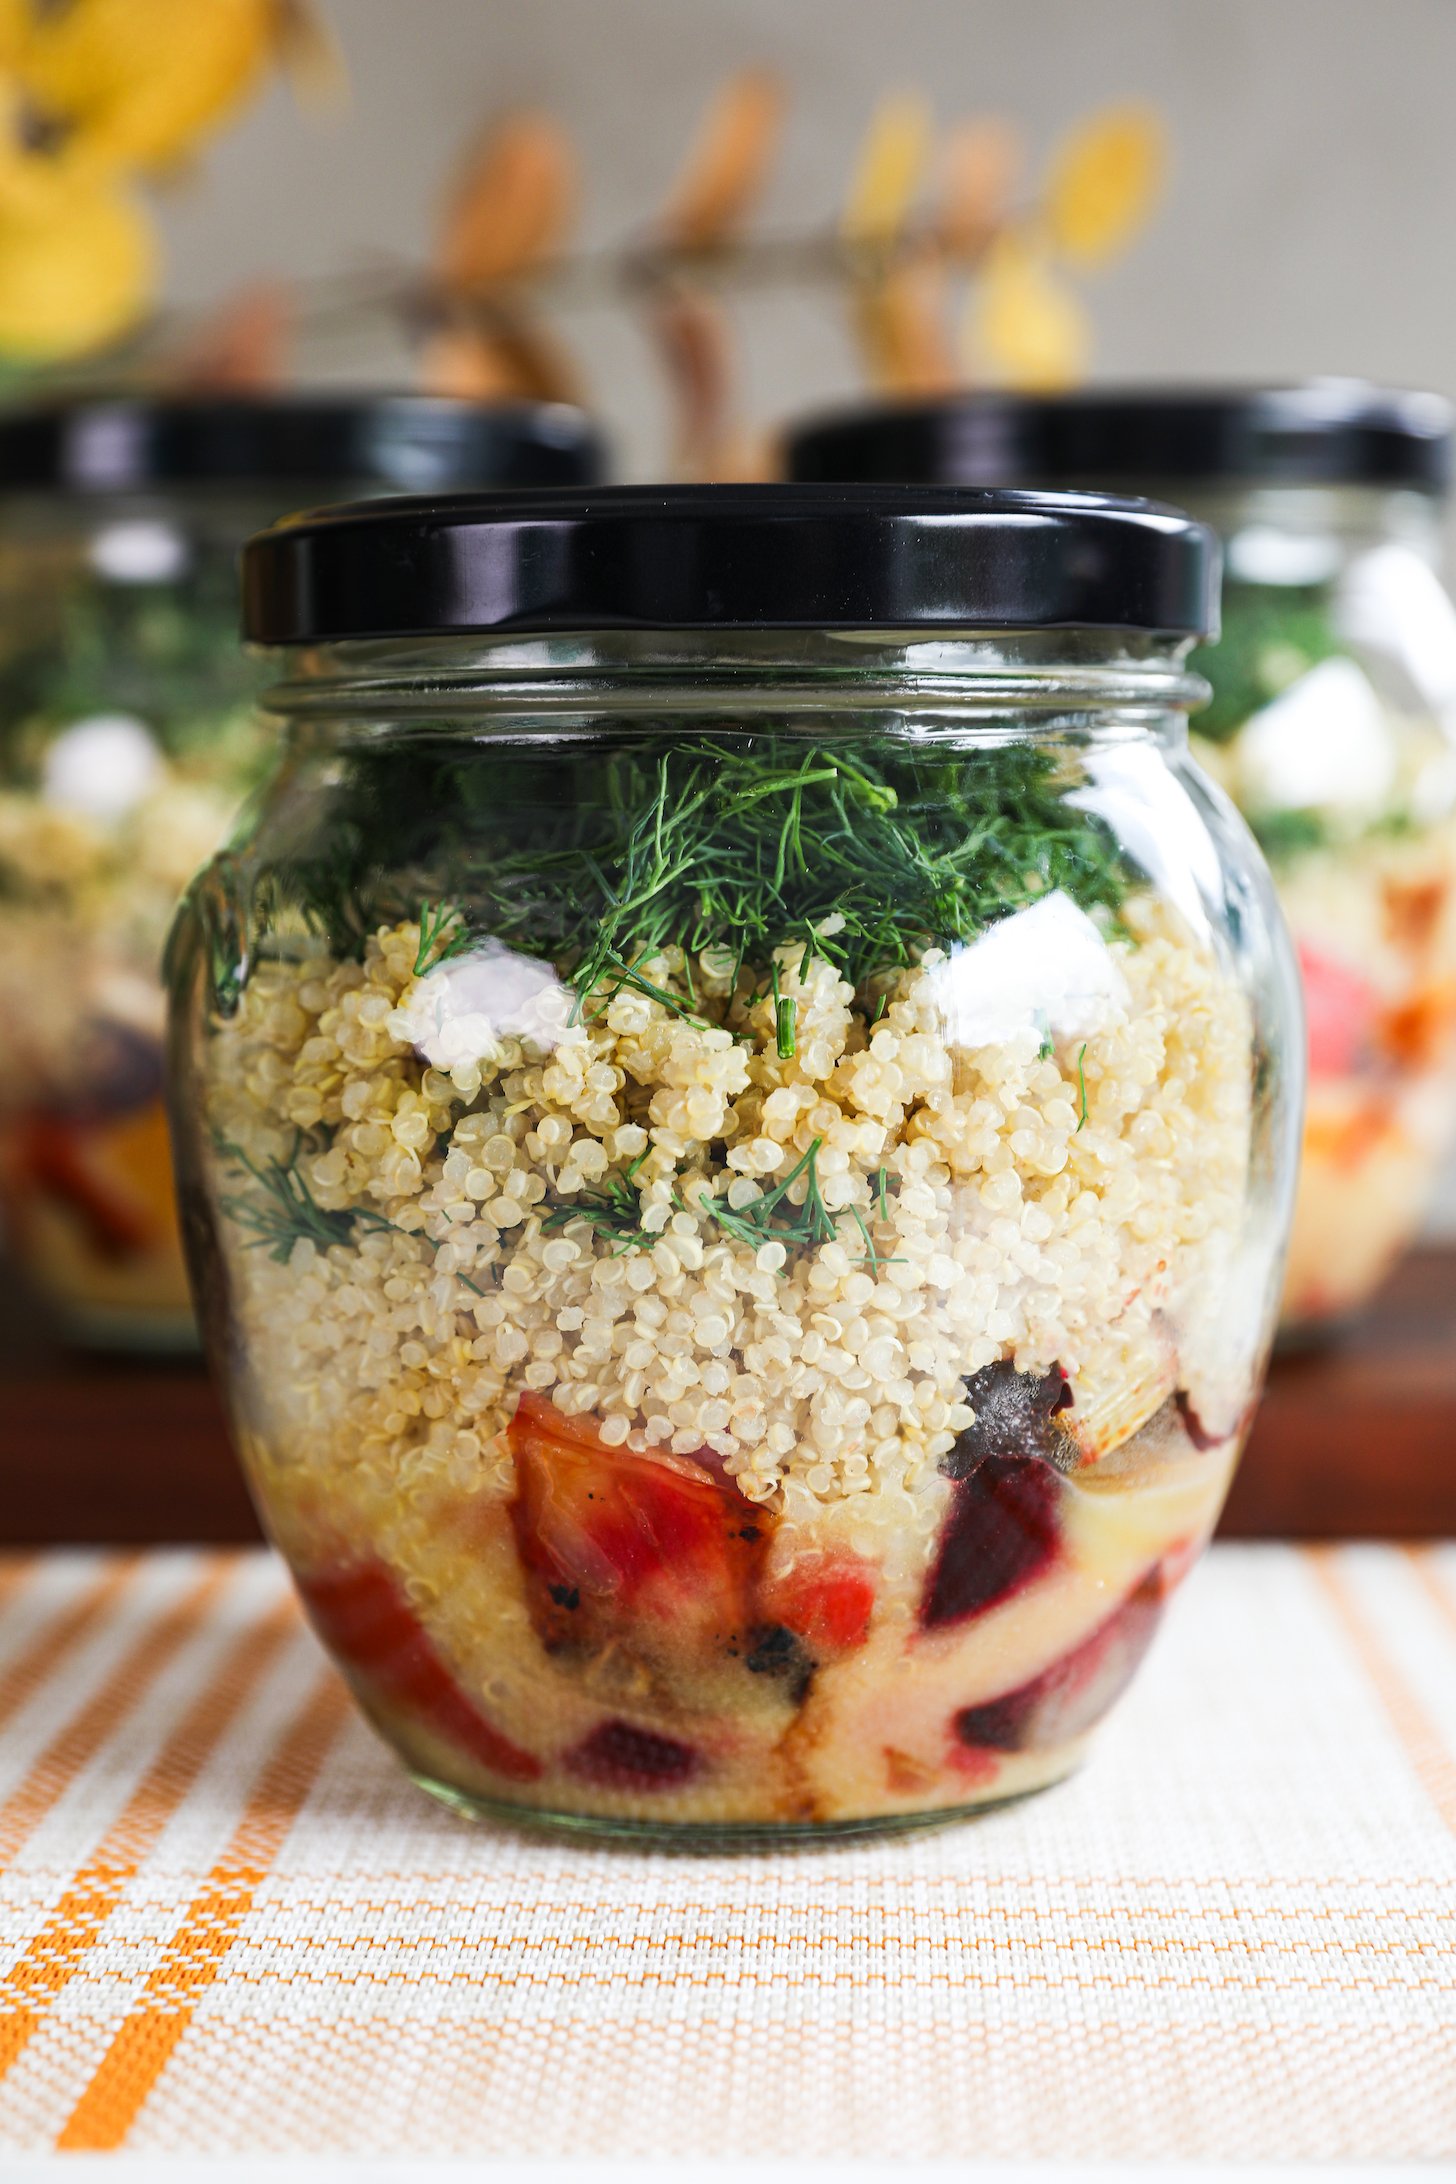 A close up of a glass jar of salad layered with dressing, veggies, quinoa and dill.